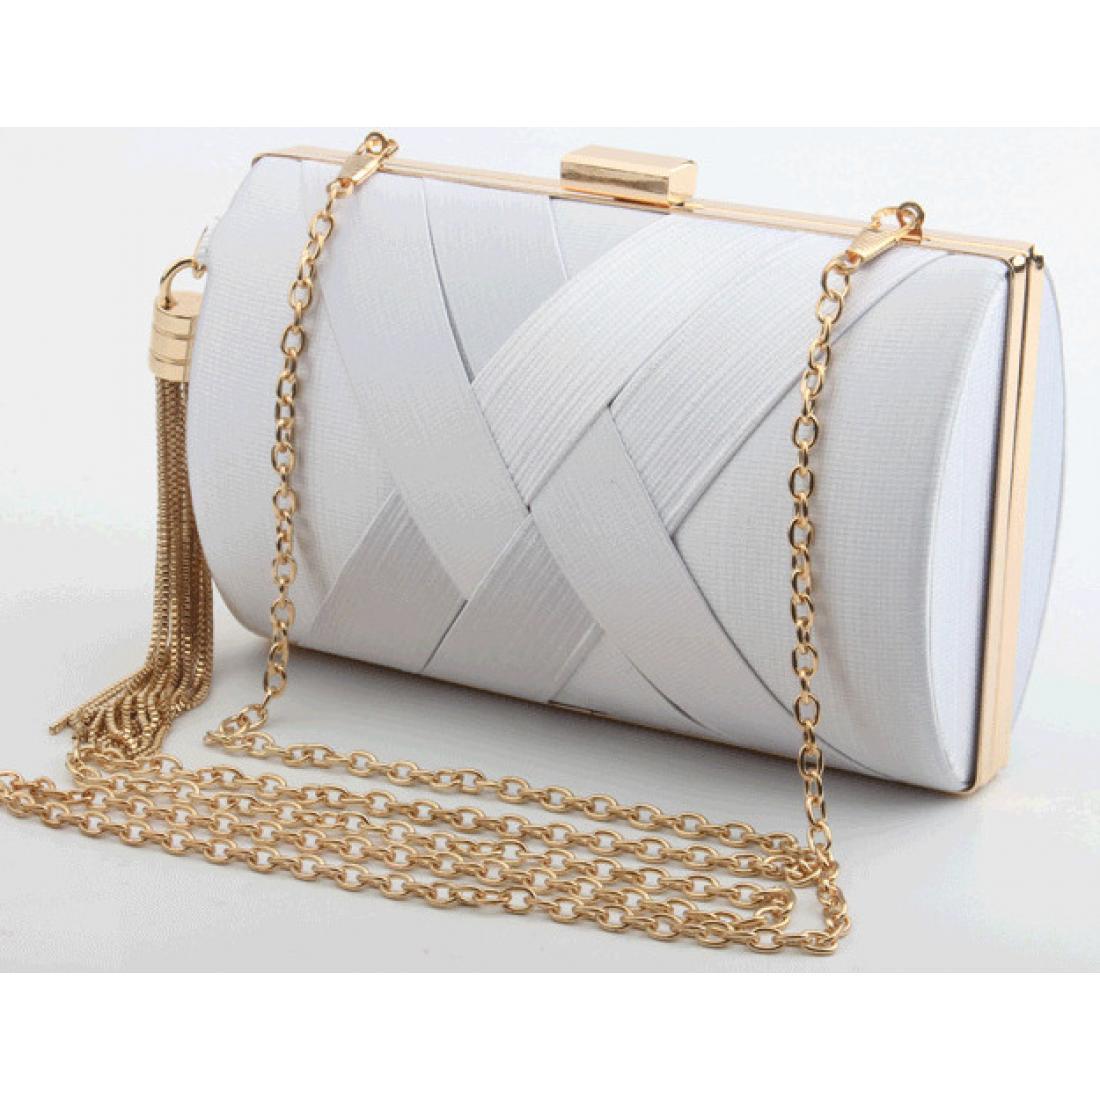 White Satin Knitted Gold Tassels Hand Evening Clutch Purses ...